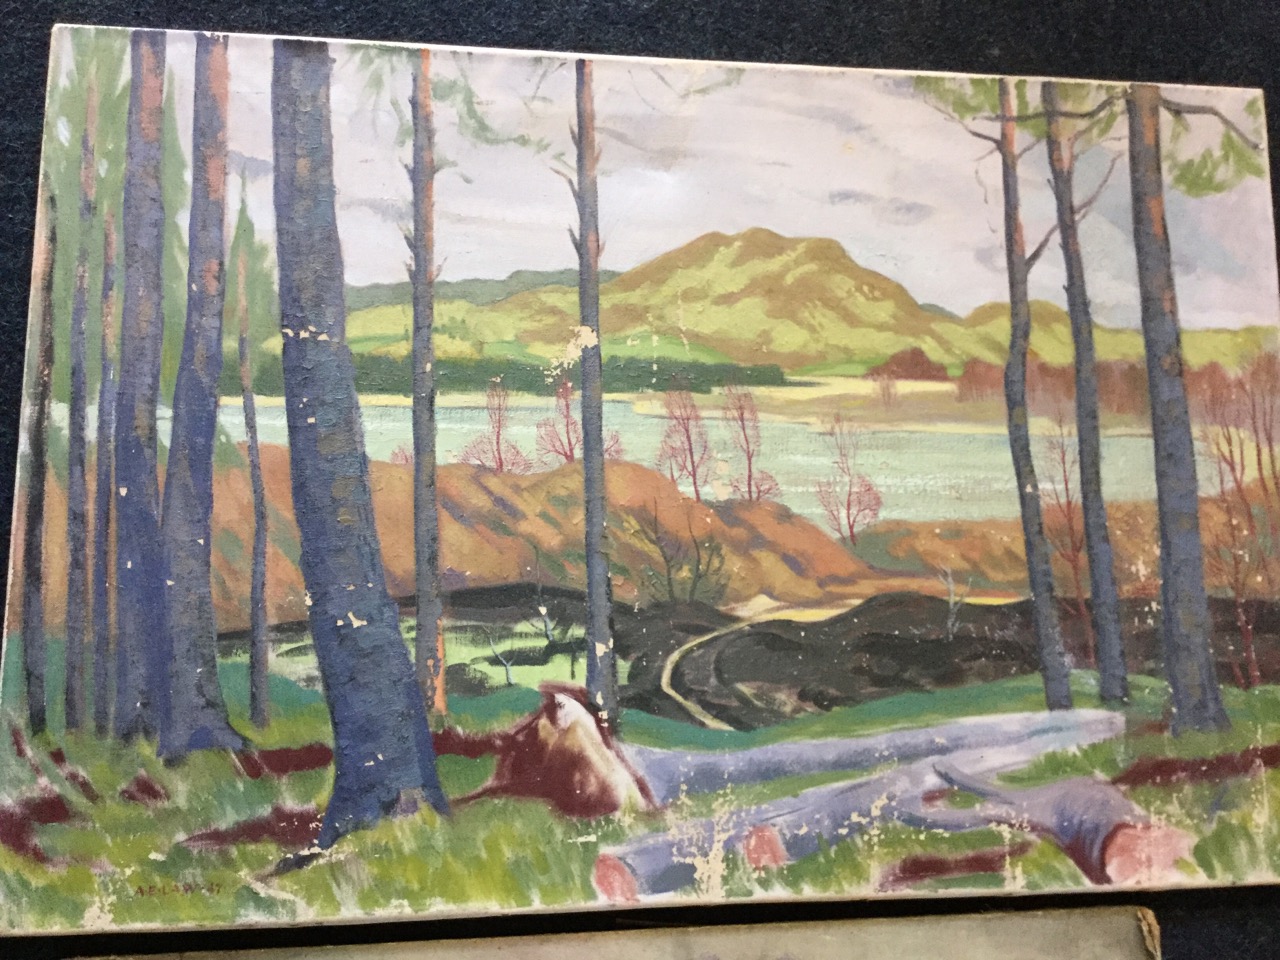 AE Law, oil on canvas, loch landscape looking through trees, signed and dated 1947, unframed; and an - Image 3 of 3